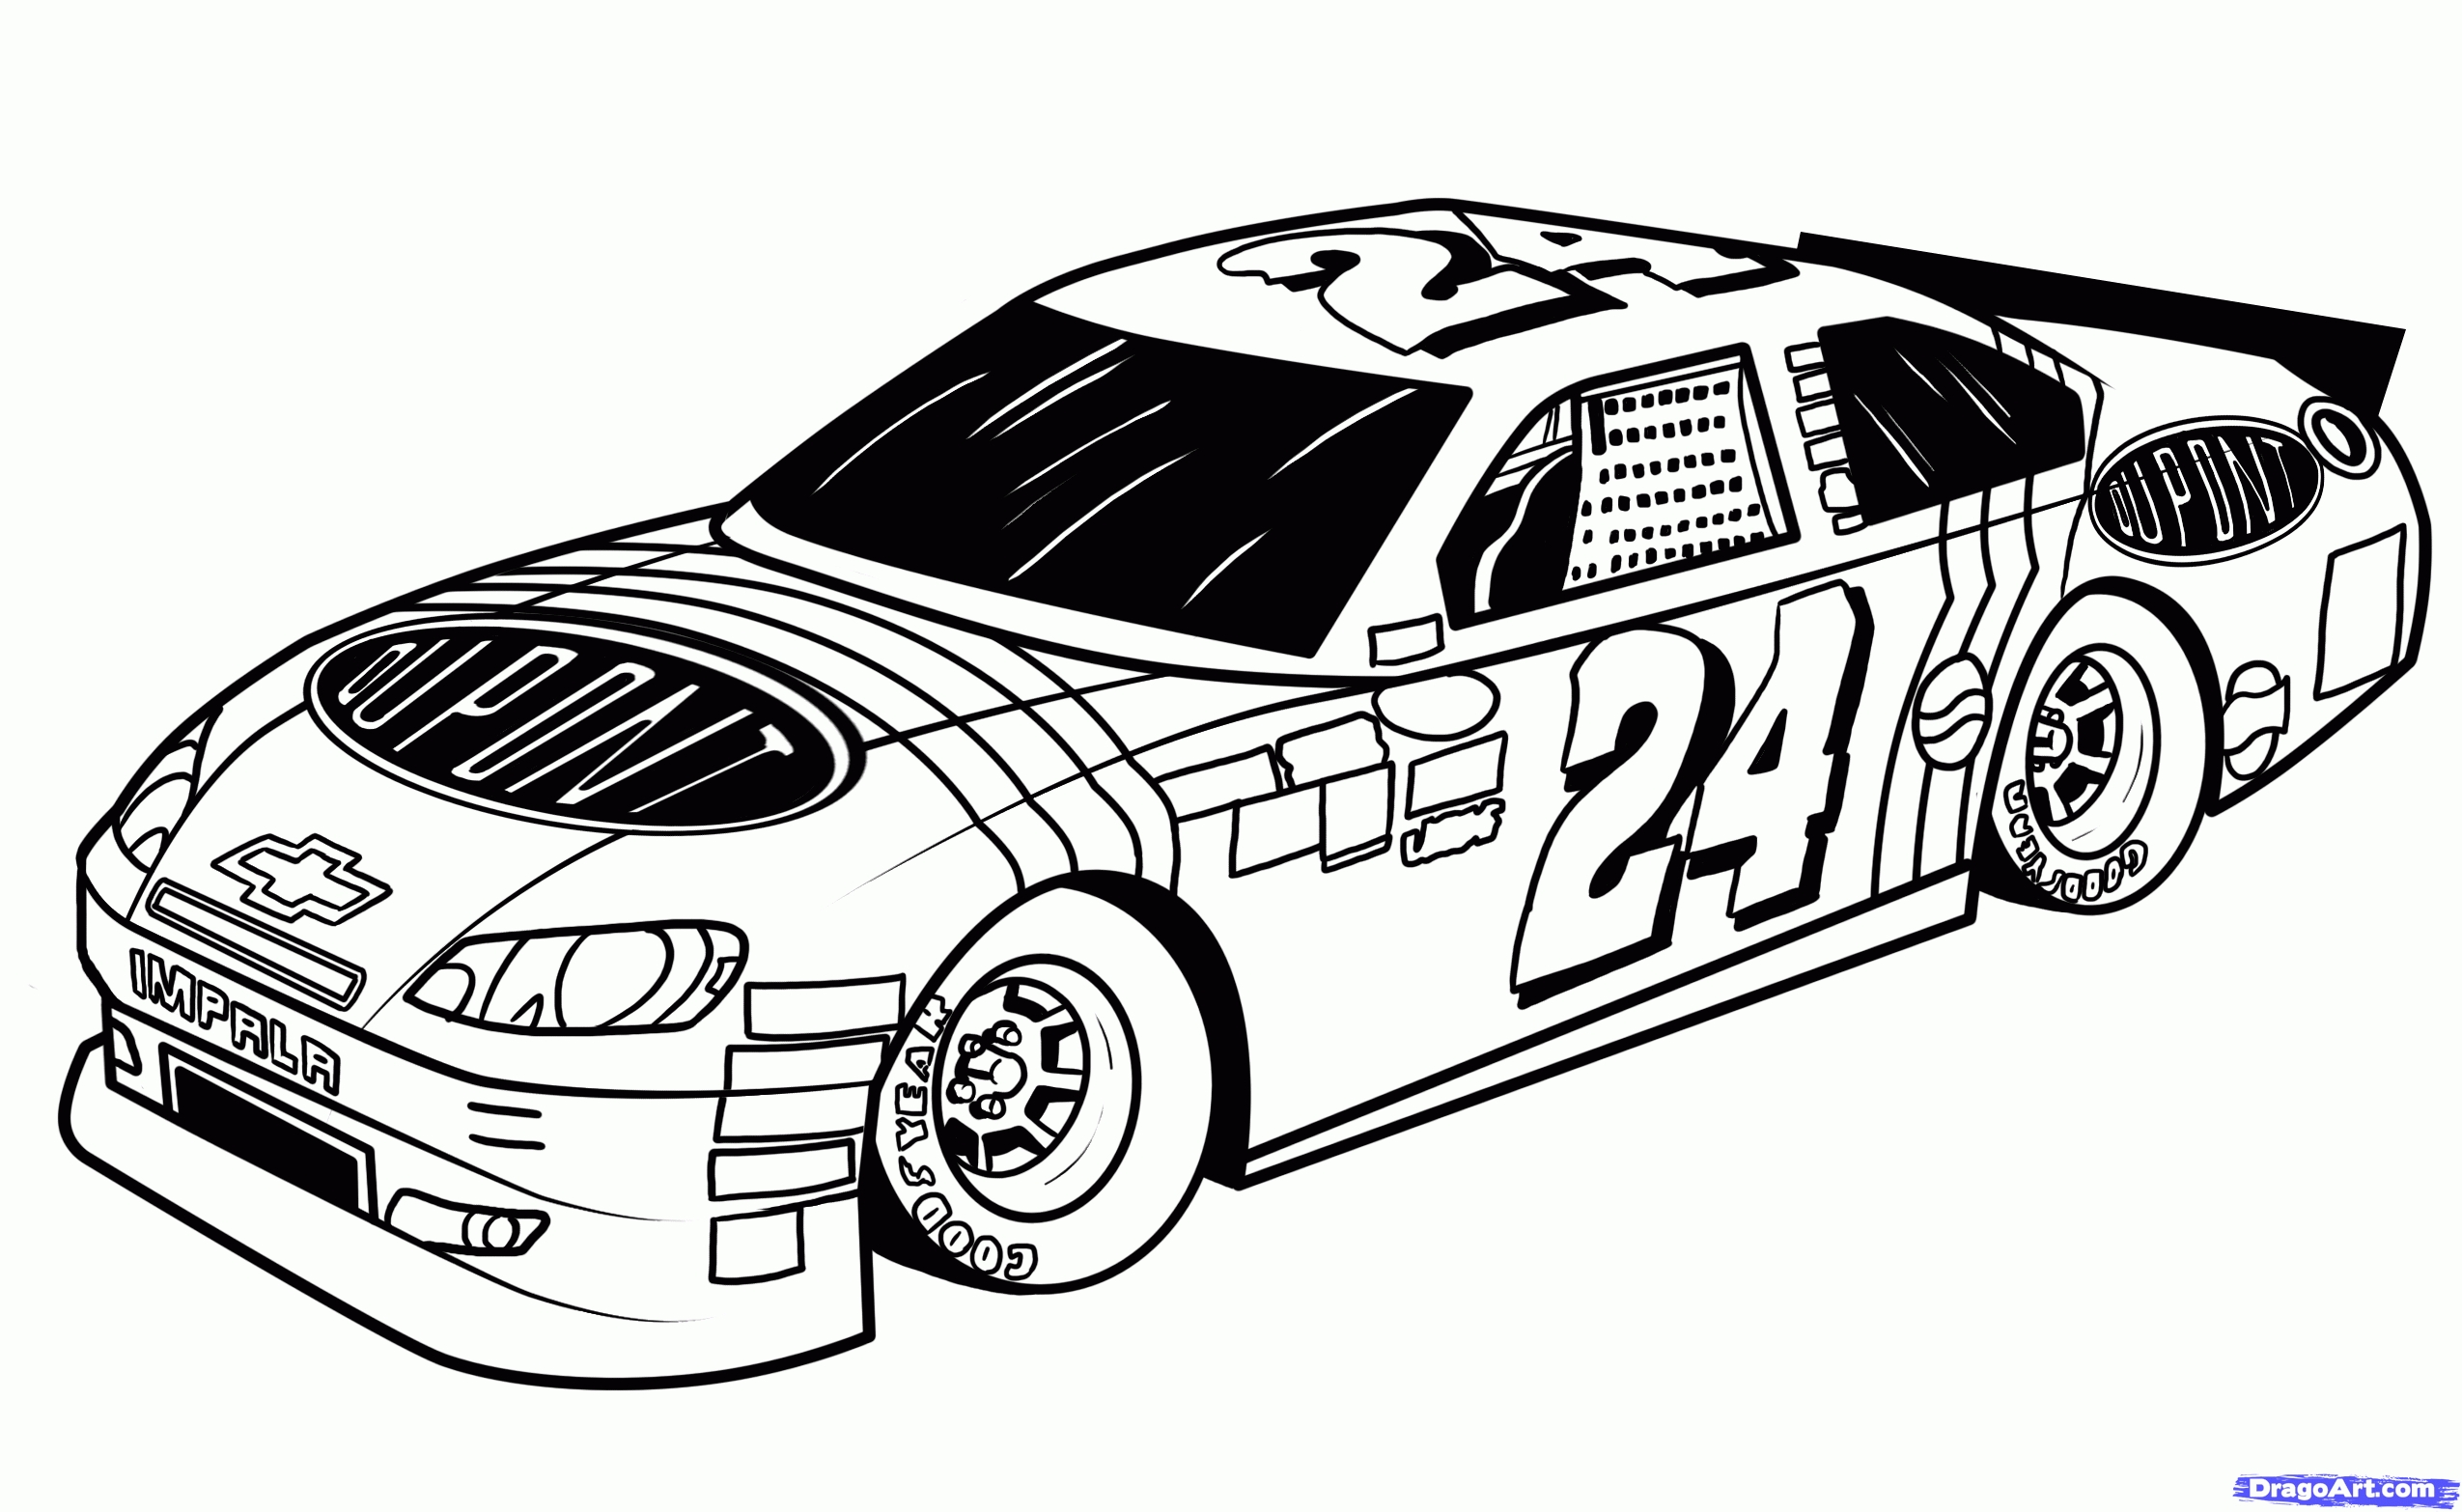 nascar-car-drawing-at-paintingvalley-explore-collection-of-nascar